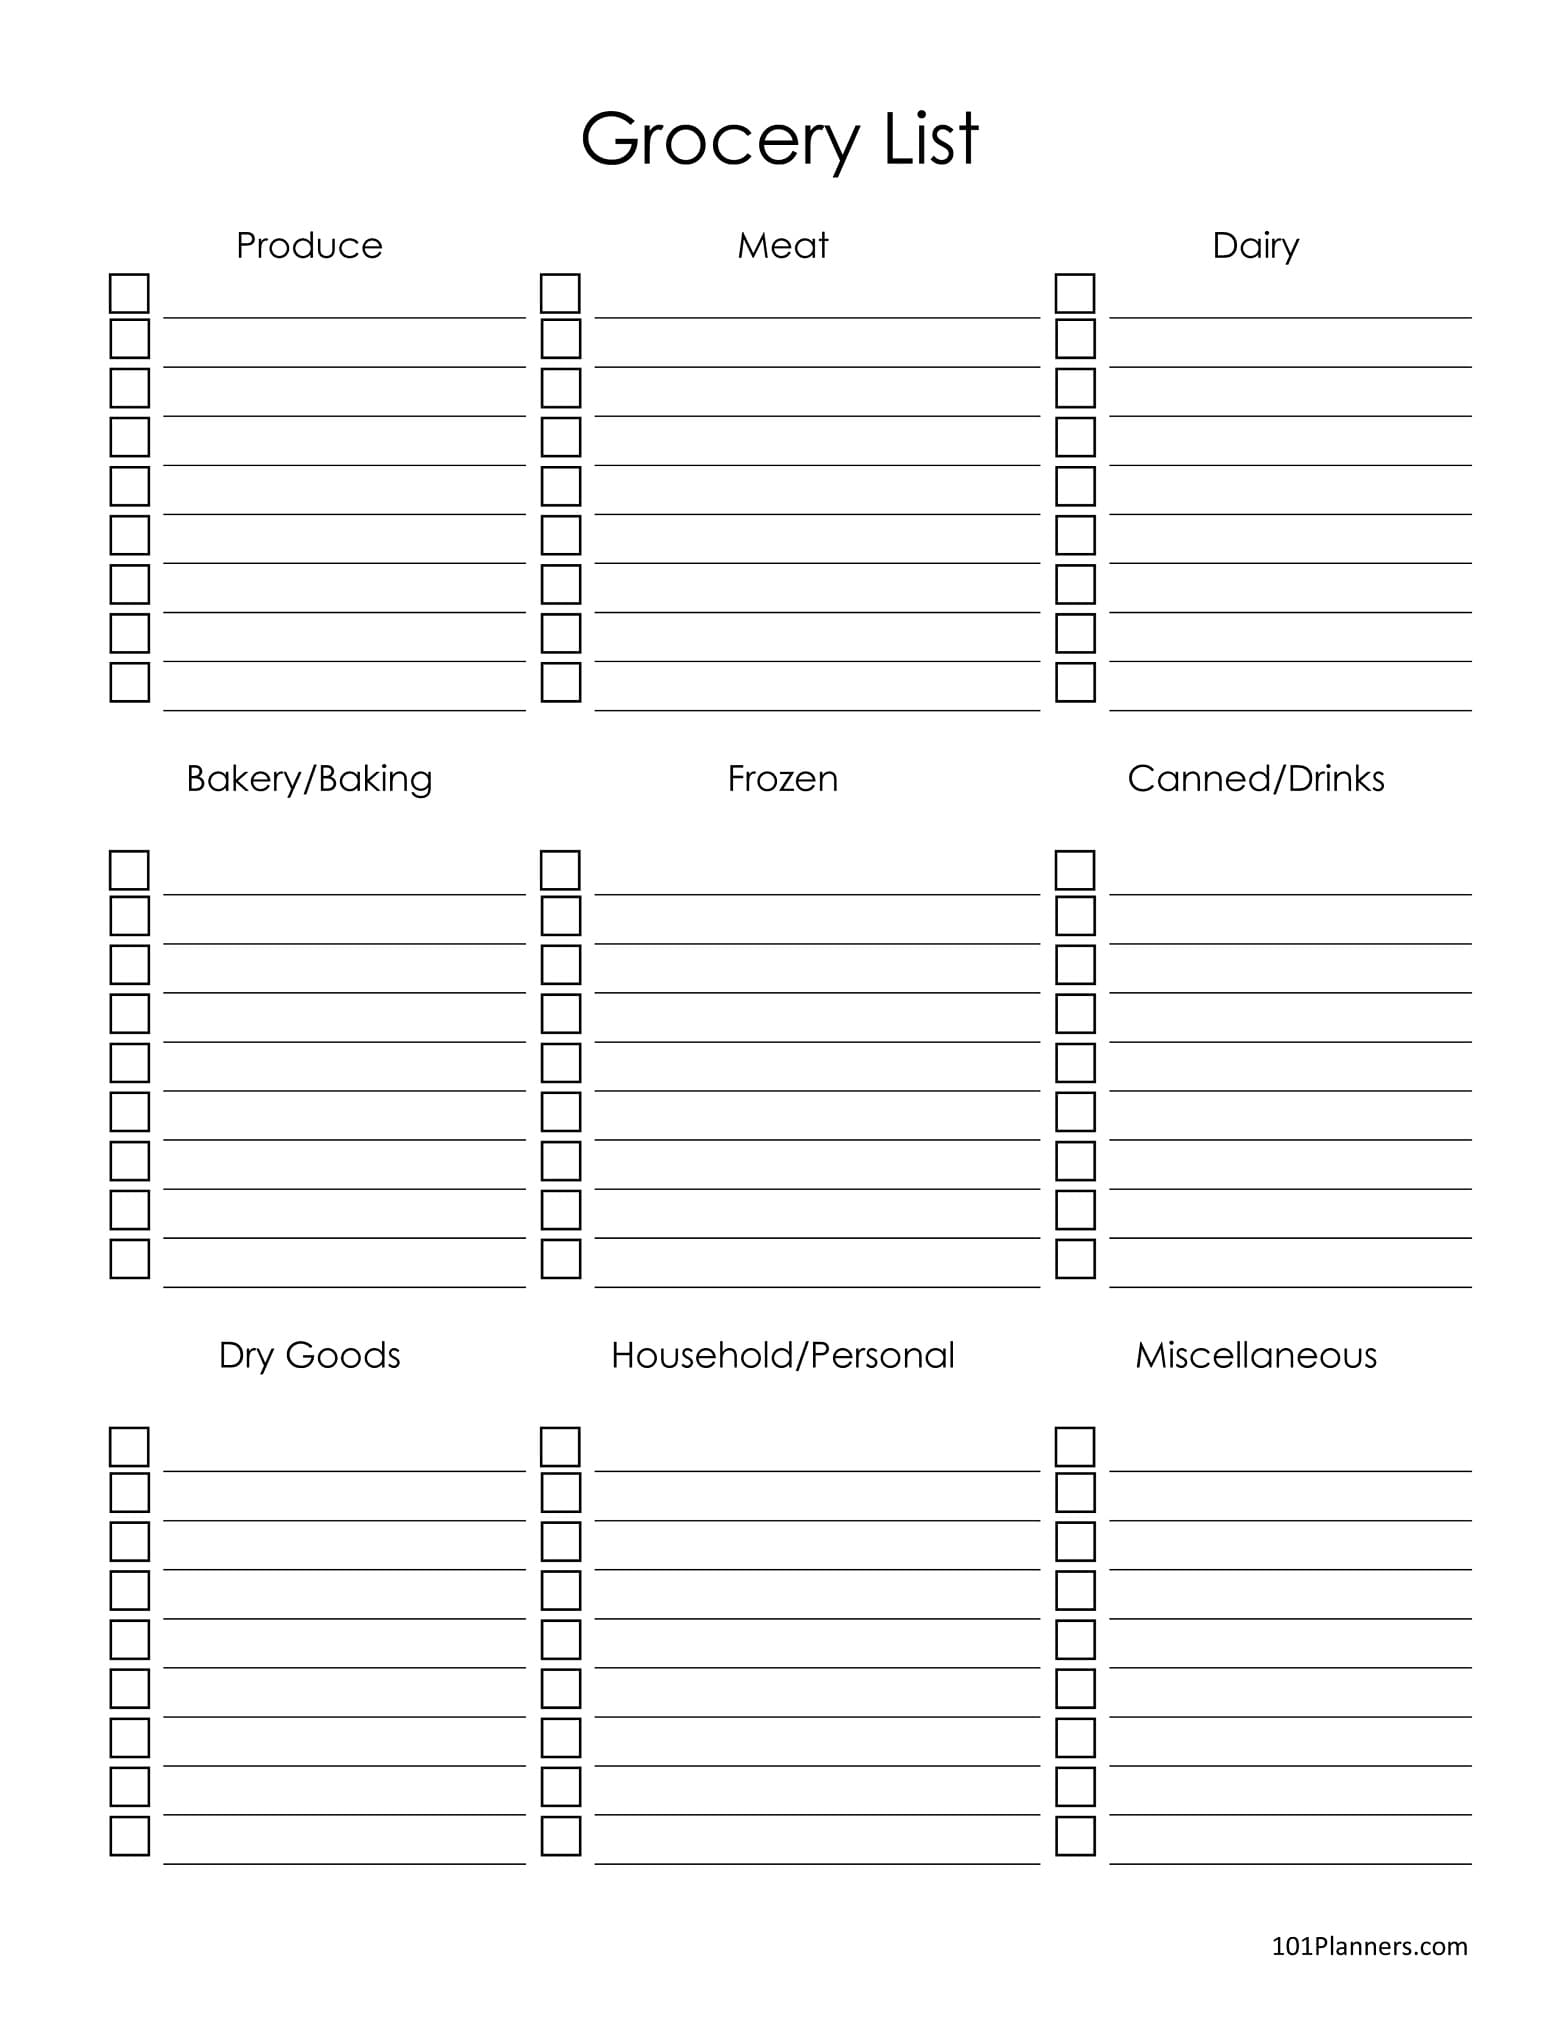 Printable Download Image of Grocery List Template